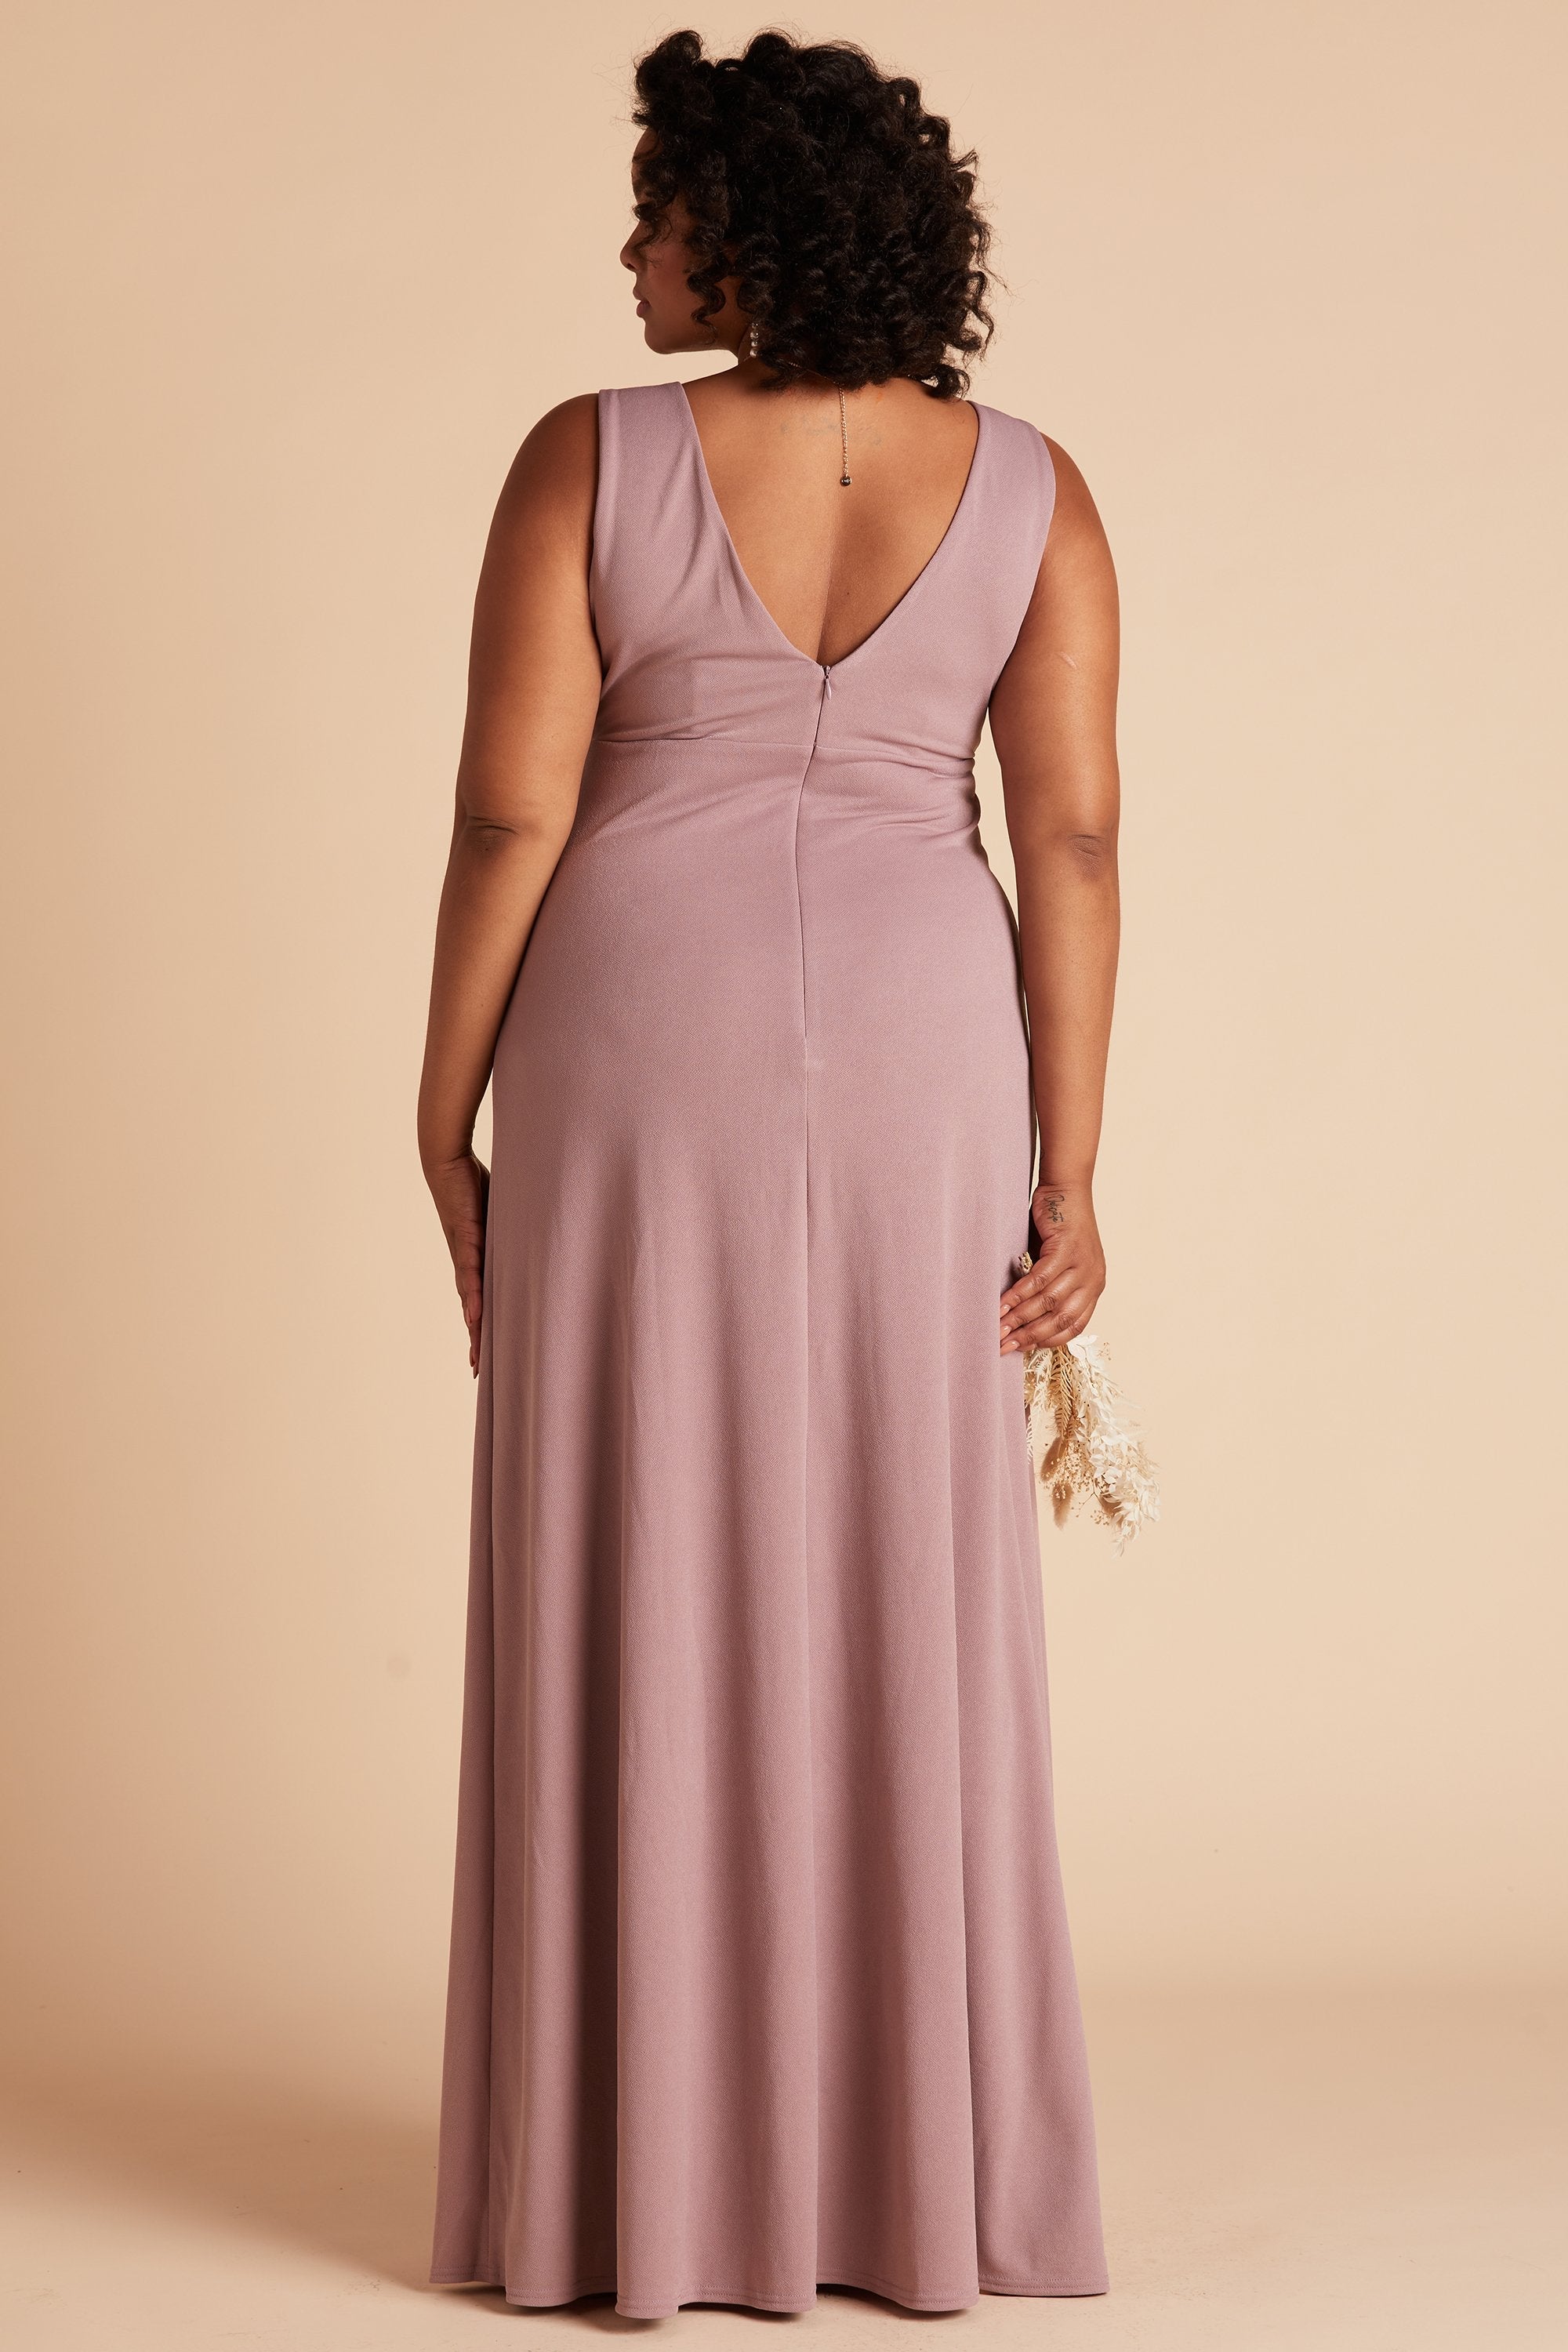 Shamin plus size bridesmaid dress in dark mauve crepe by Birdy Grey, back view